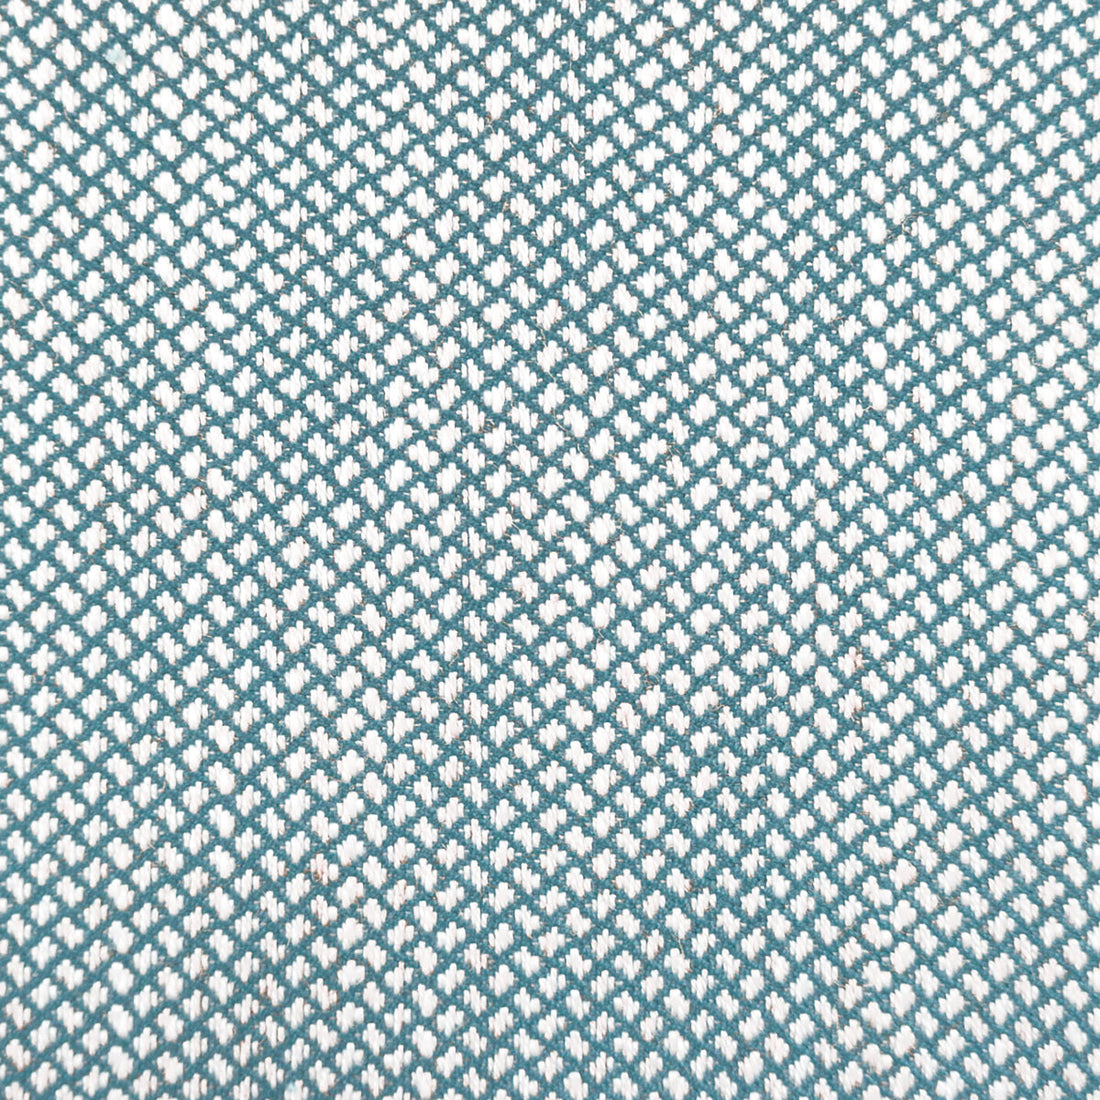 Sabuki fabric in agua color - pattern GDT5638.008.0 - by Gaston y Daniela in the Gaston Japon collection